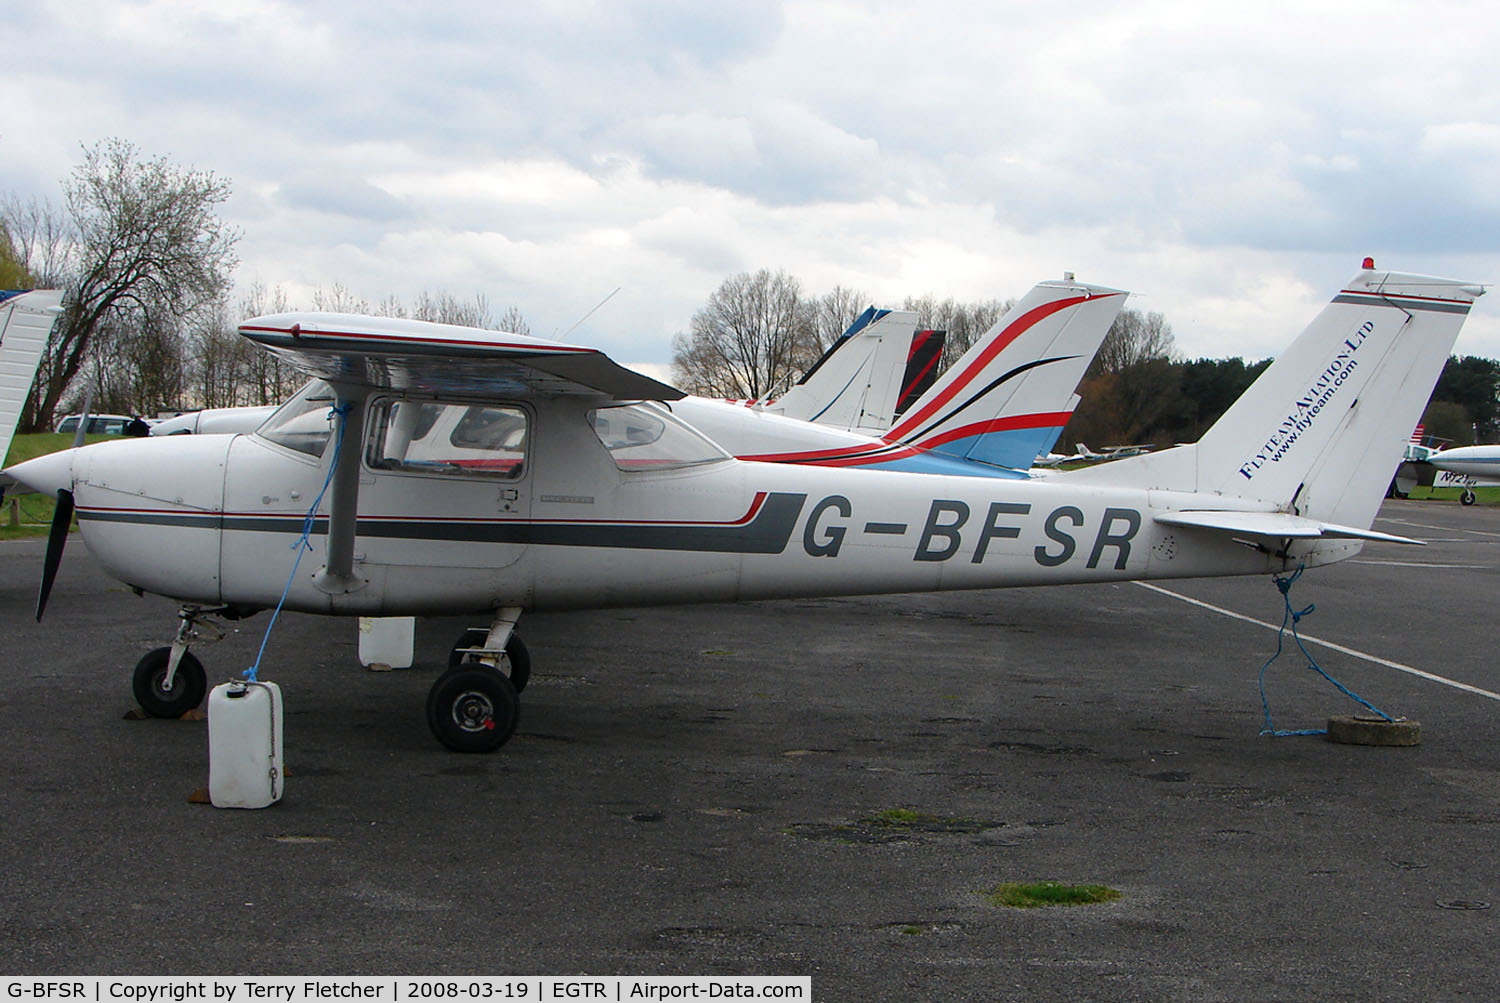 G-BFSR, 1969 Reims F150J C/N 0504, Part of the busy GA scene at Elstree Airfield in the northern suburbs of London